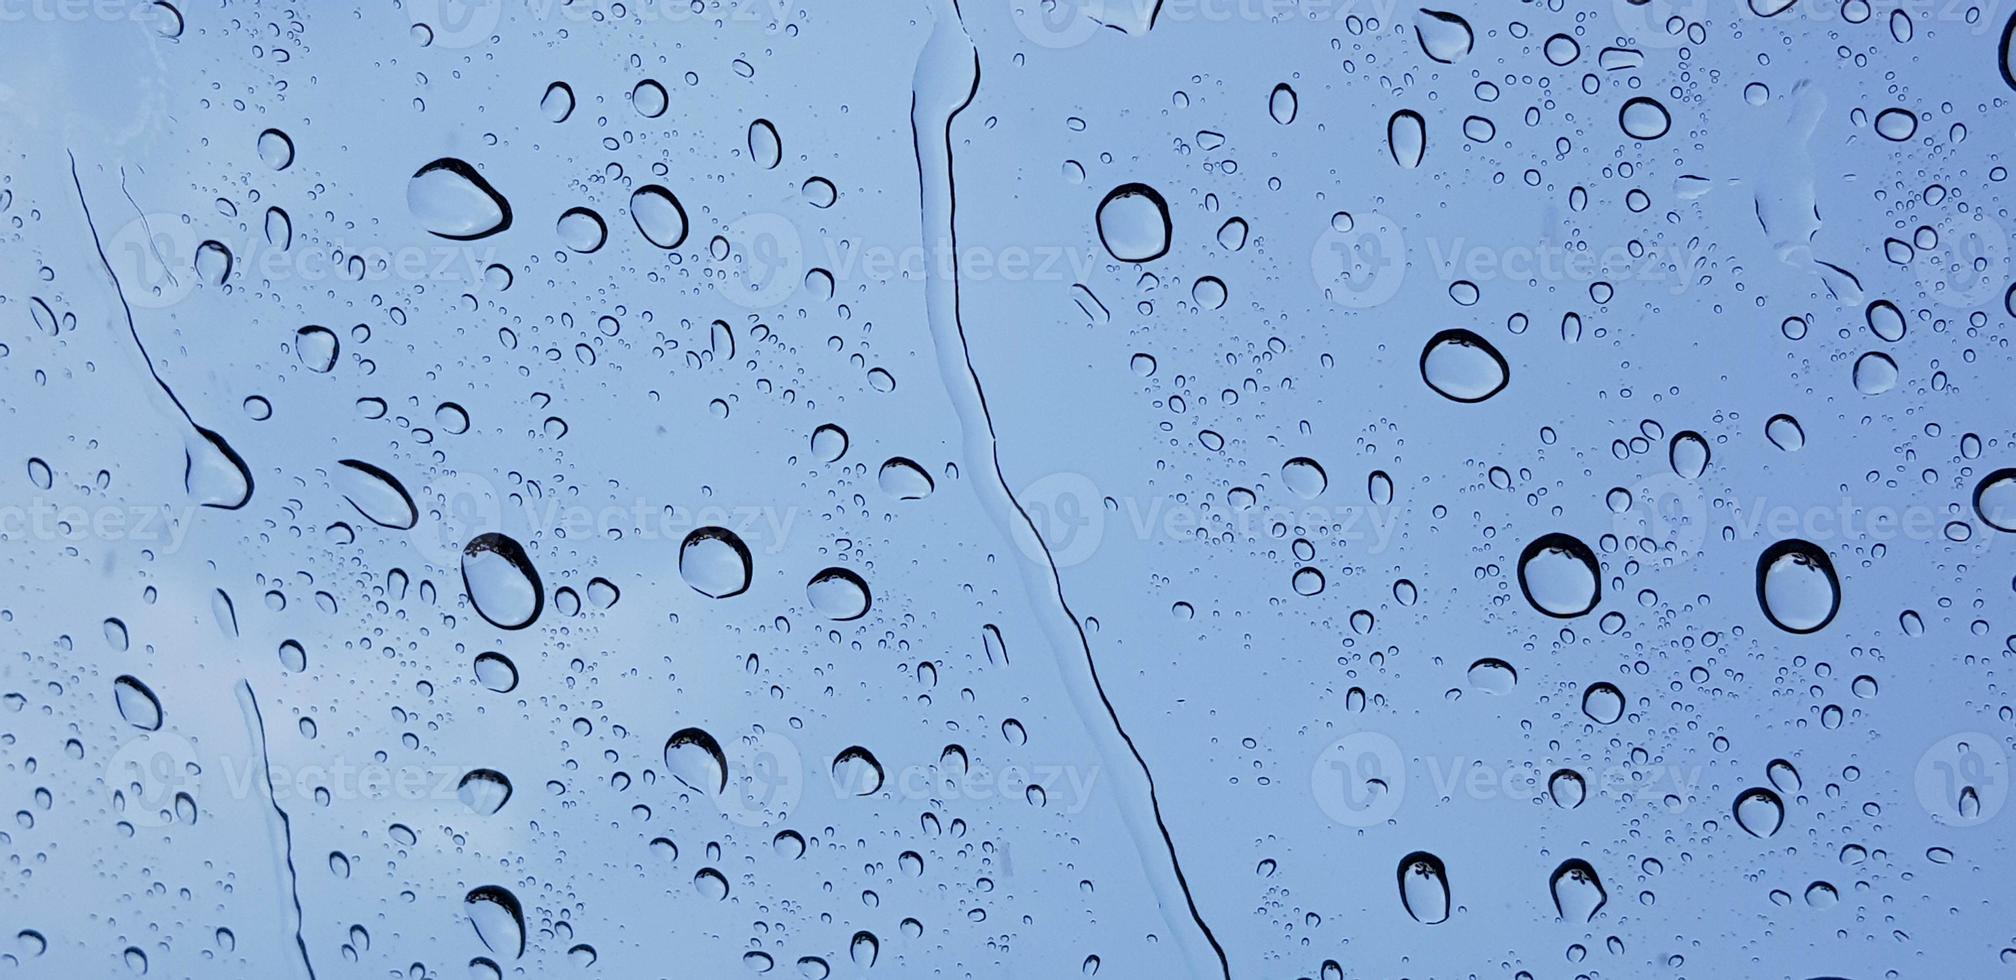 Water droplets perspective through window glass surface against blue sky good for multimedia content photo